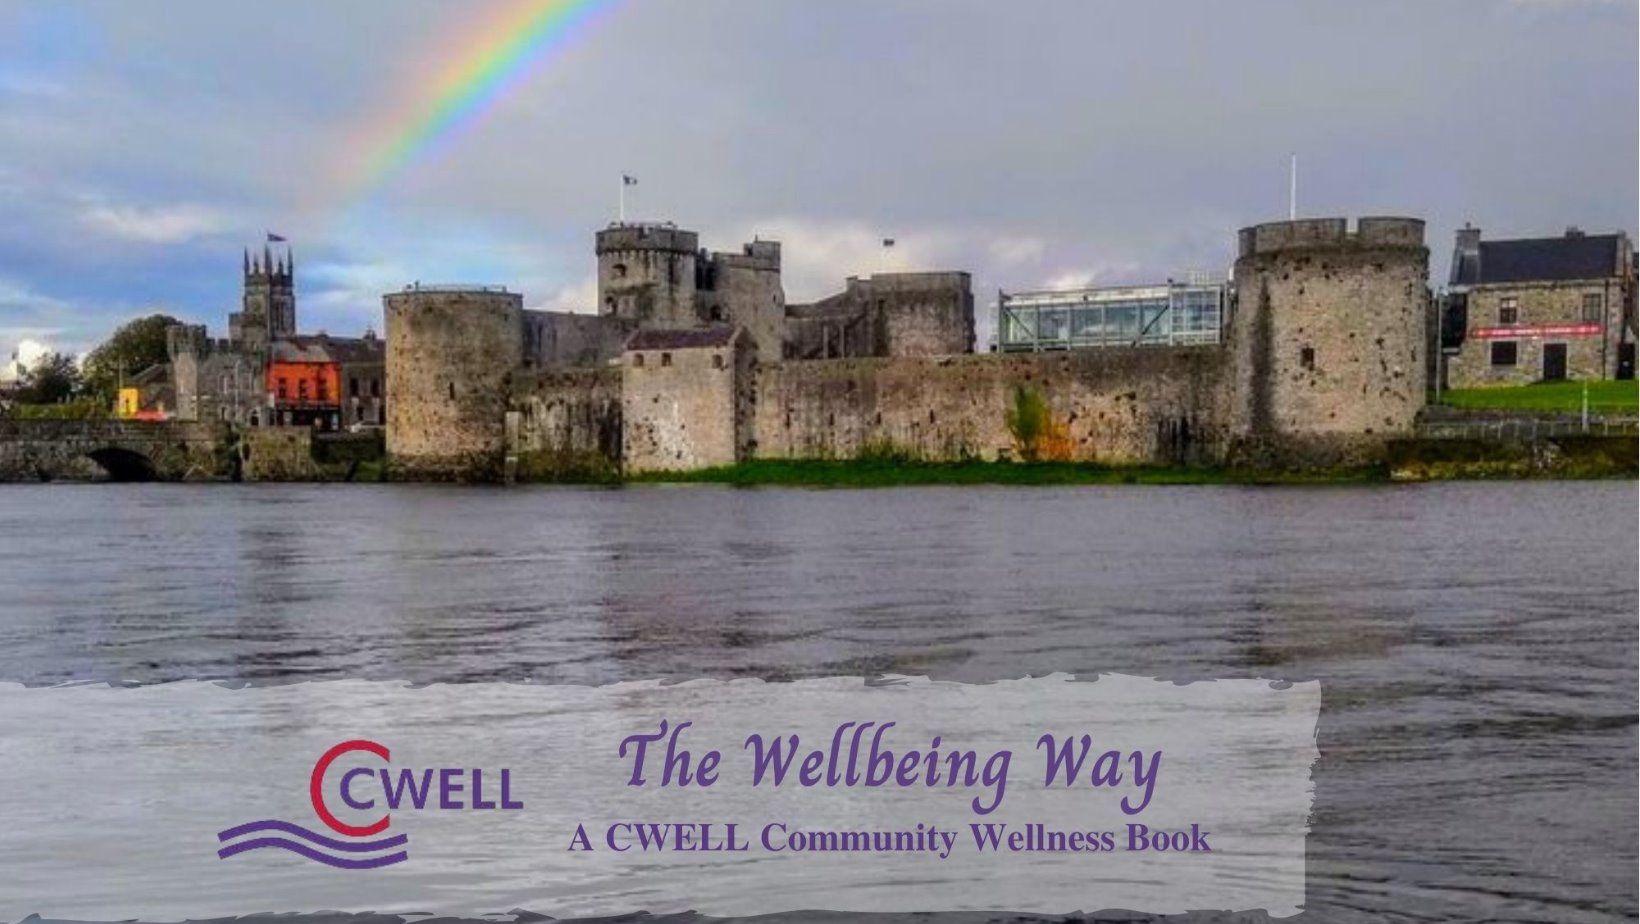 The Wellbeing Way- CWELL students are launching The Wellbeing Way, A CWELL Community Wellness Book.